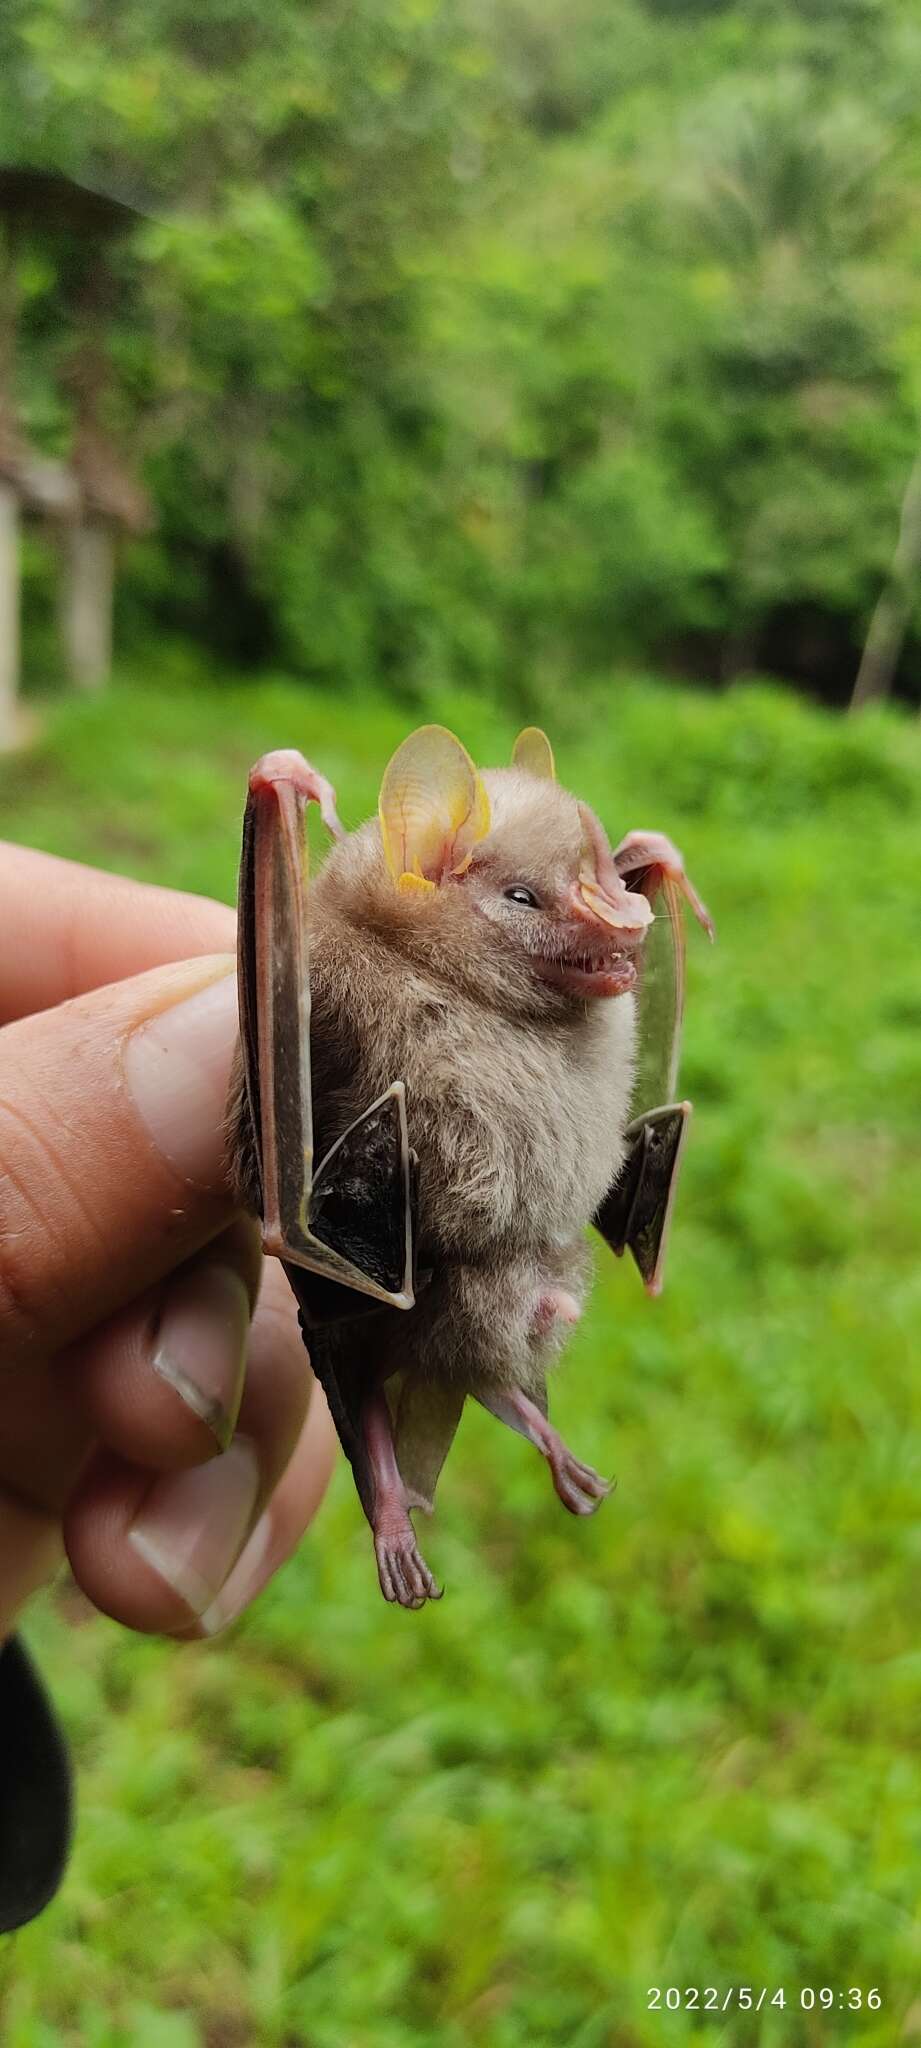 Image of MacConnell's Bat.